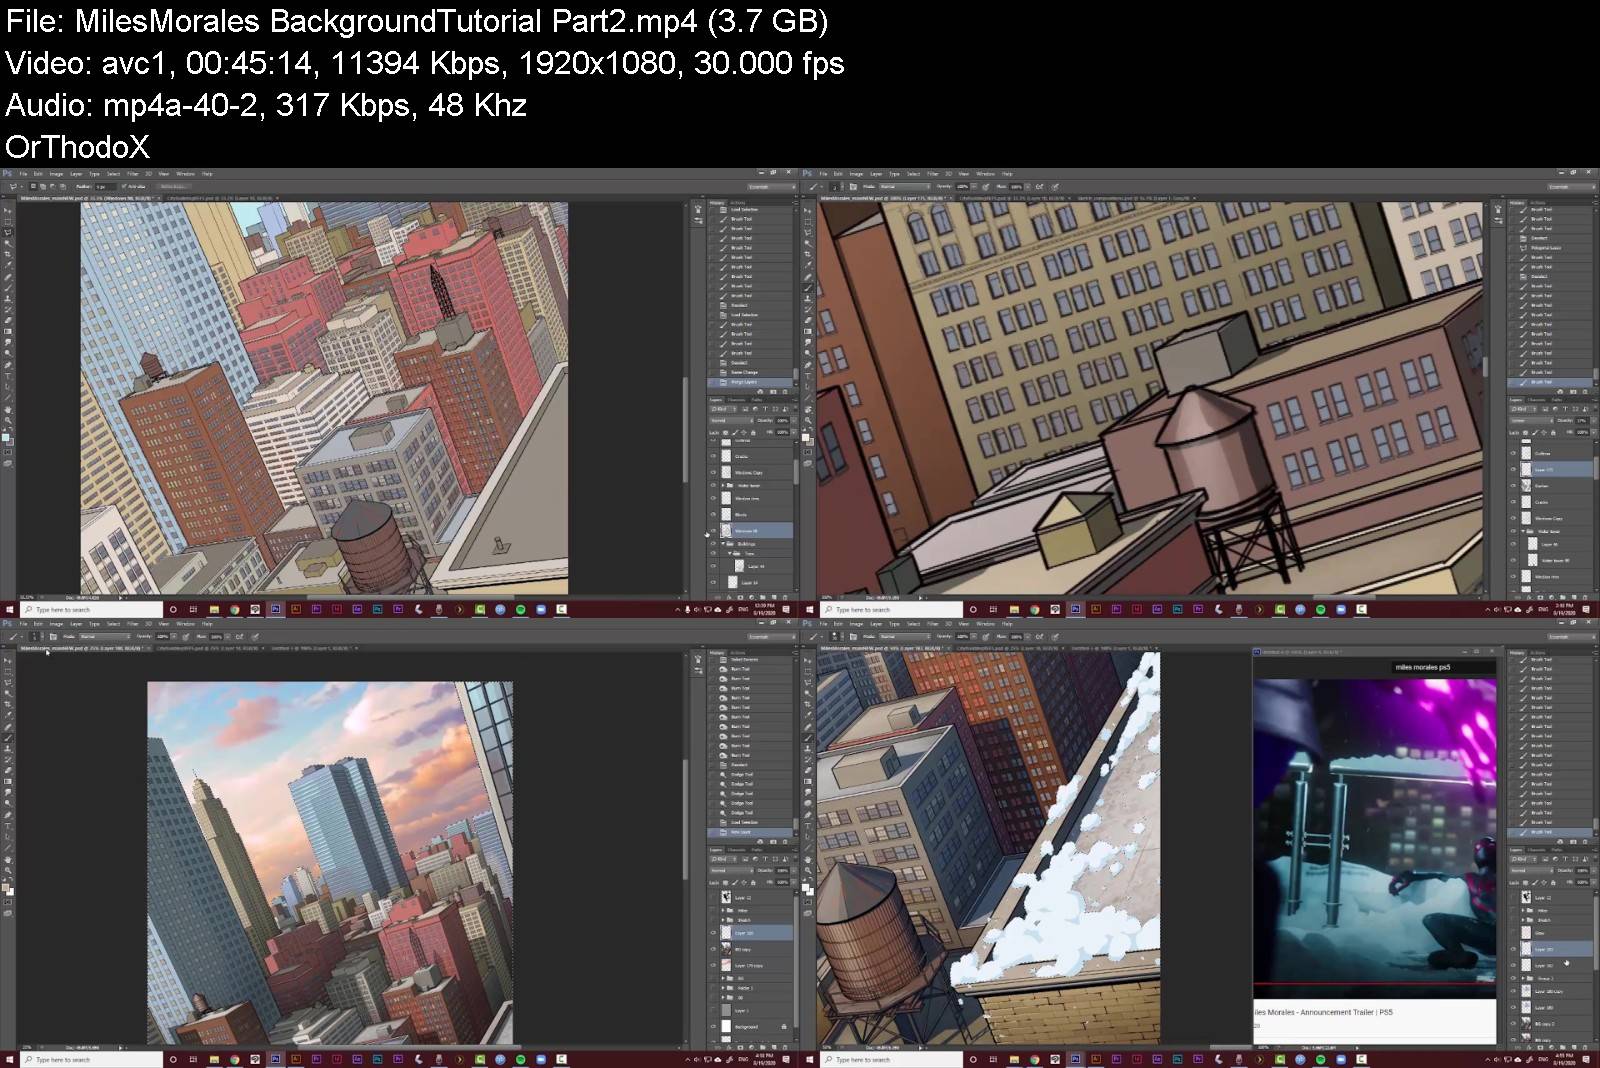 068981_reating_art_video_tutorials_and_time-lapses.jpg